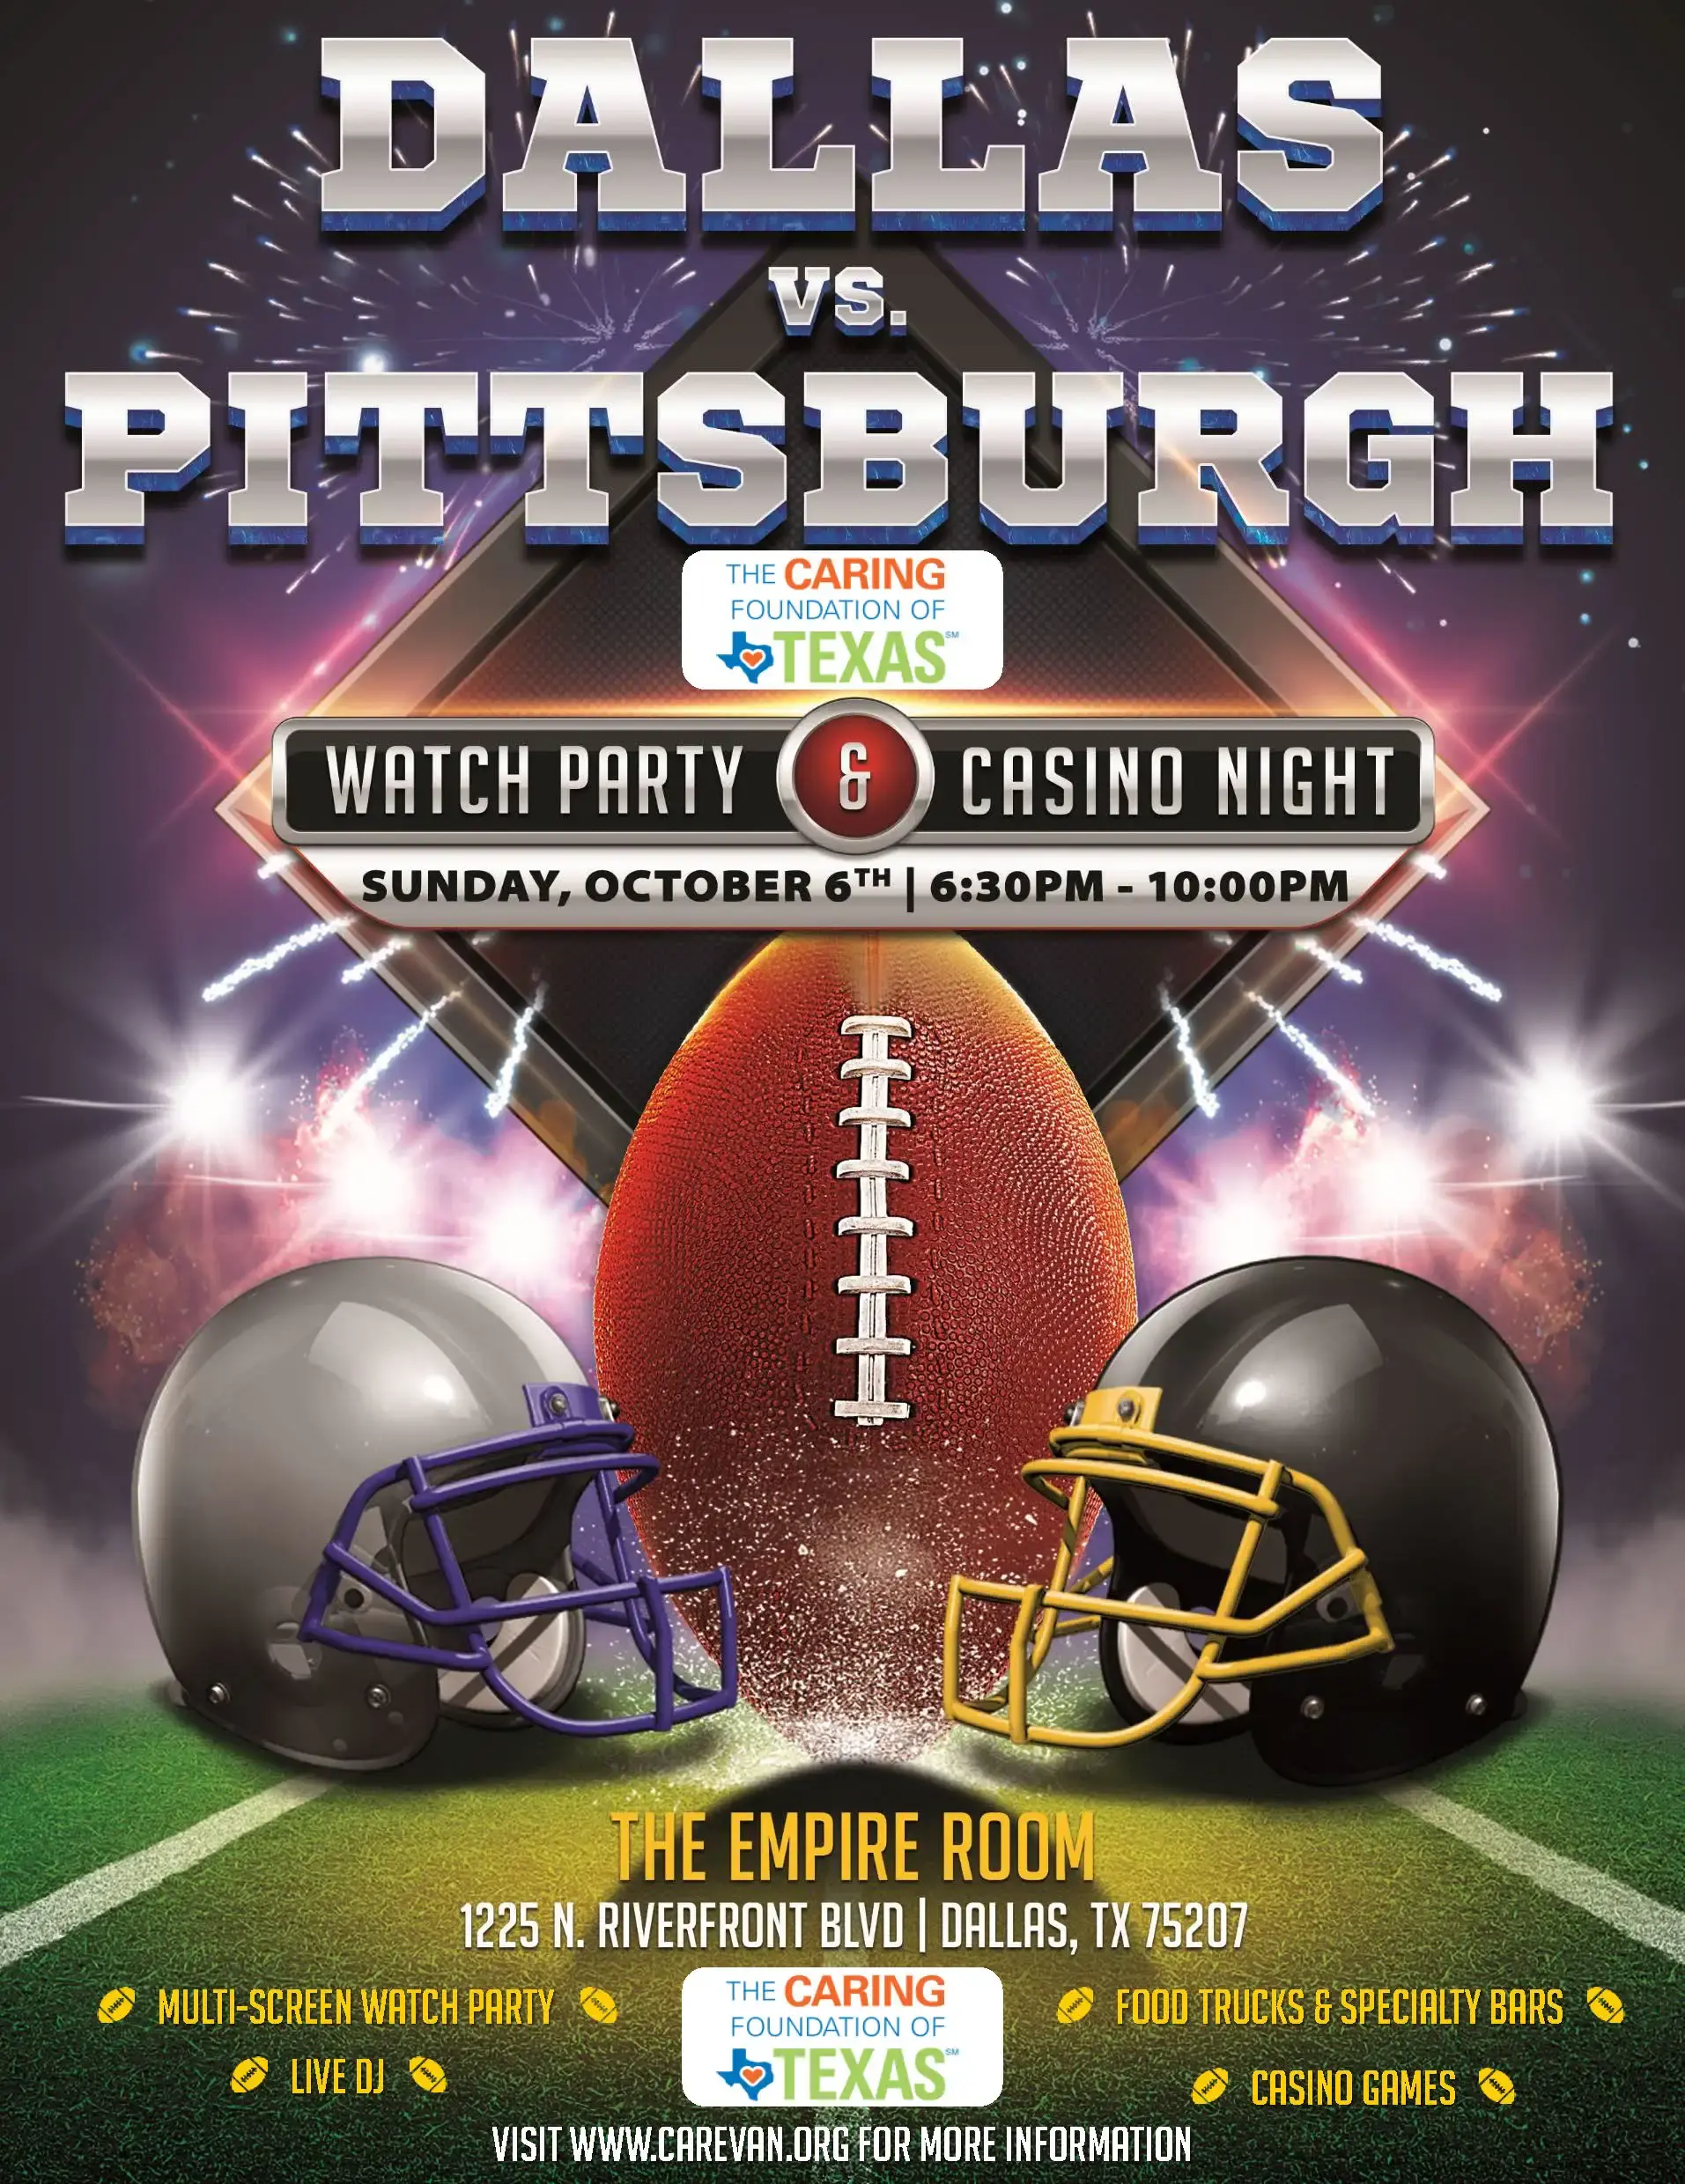 Promotional poster for a Sunday night football game viewing party at the Empire Room in Dallas, Texas, featuring a football and helmets, with event details for fall '24.